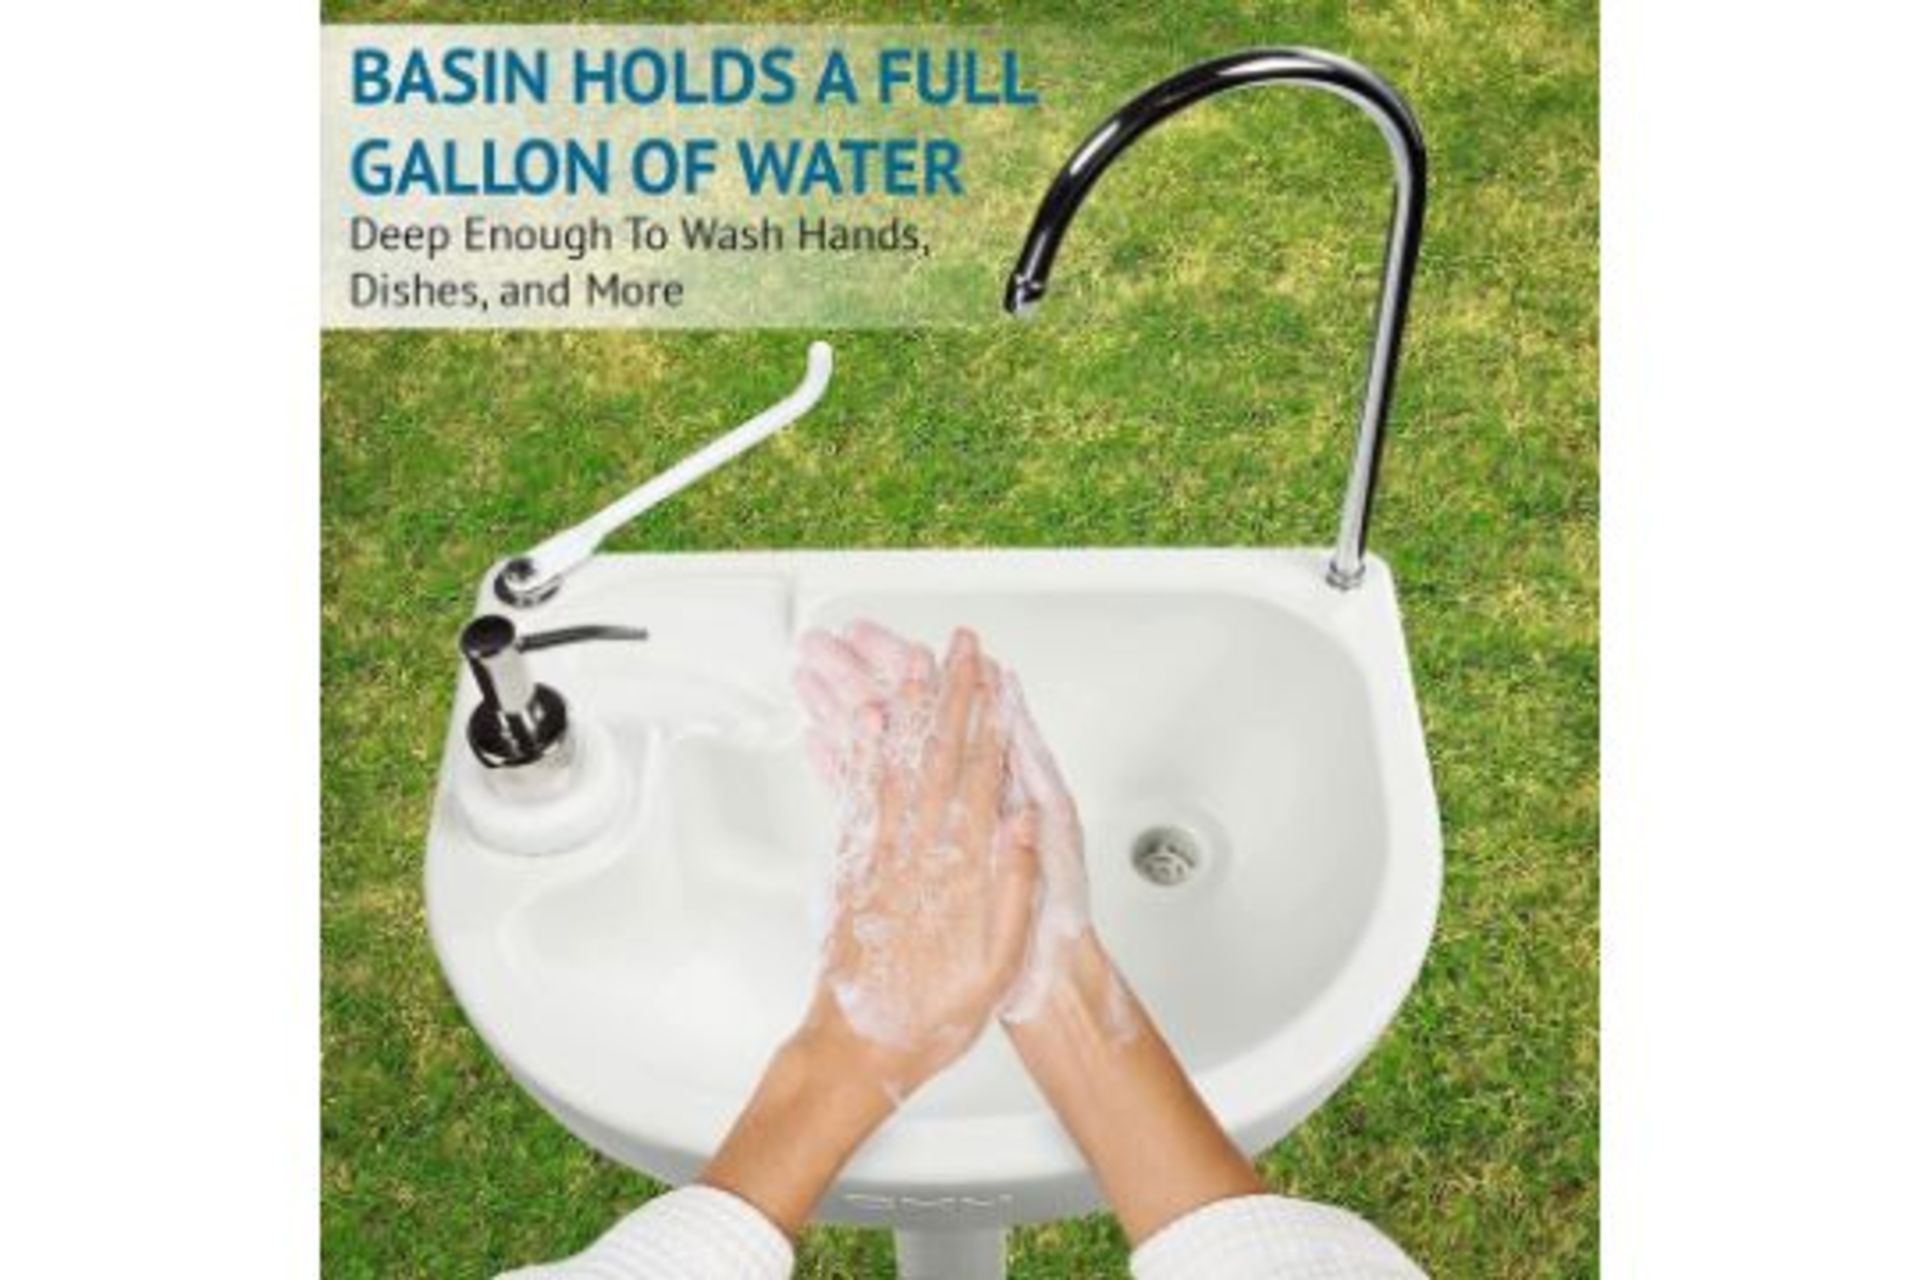 NEW BOXED Portable Hand Wash Station Foot Pump Mobile Freestanding Hand Wash Basin with Towel - Image 3 of 6